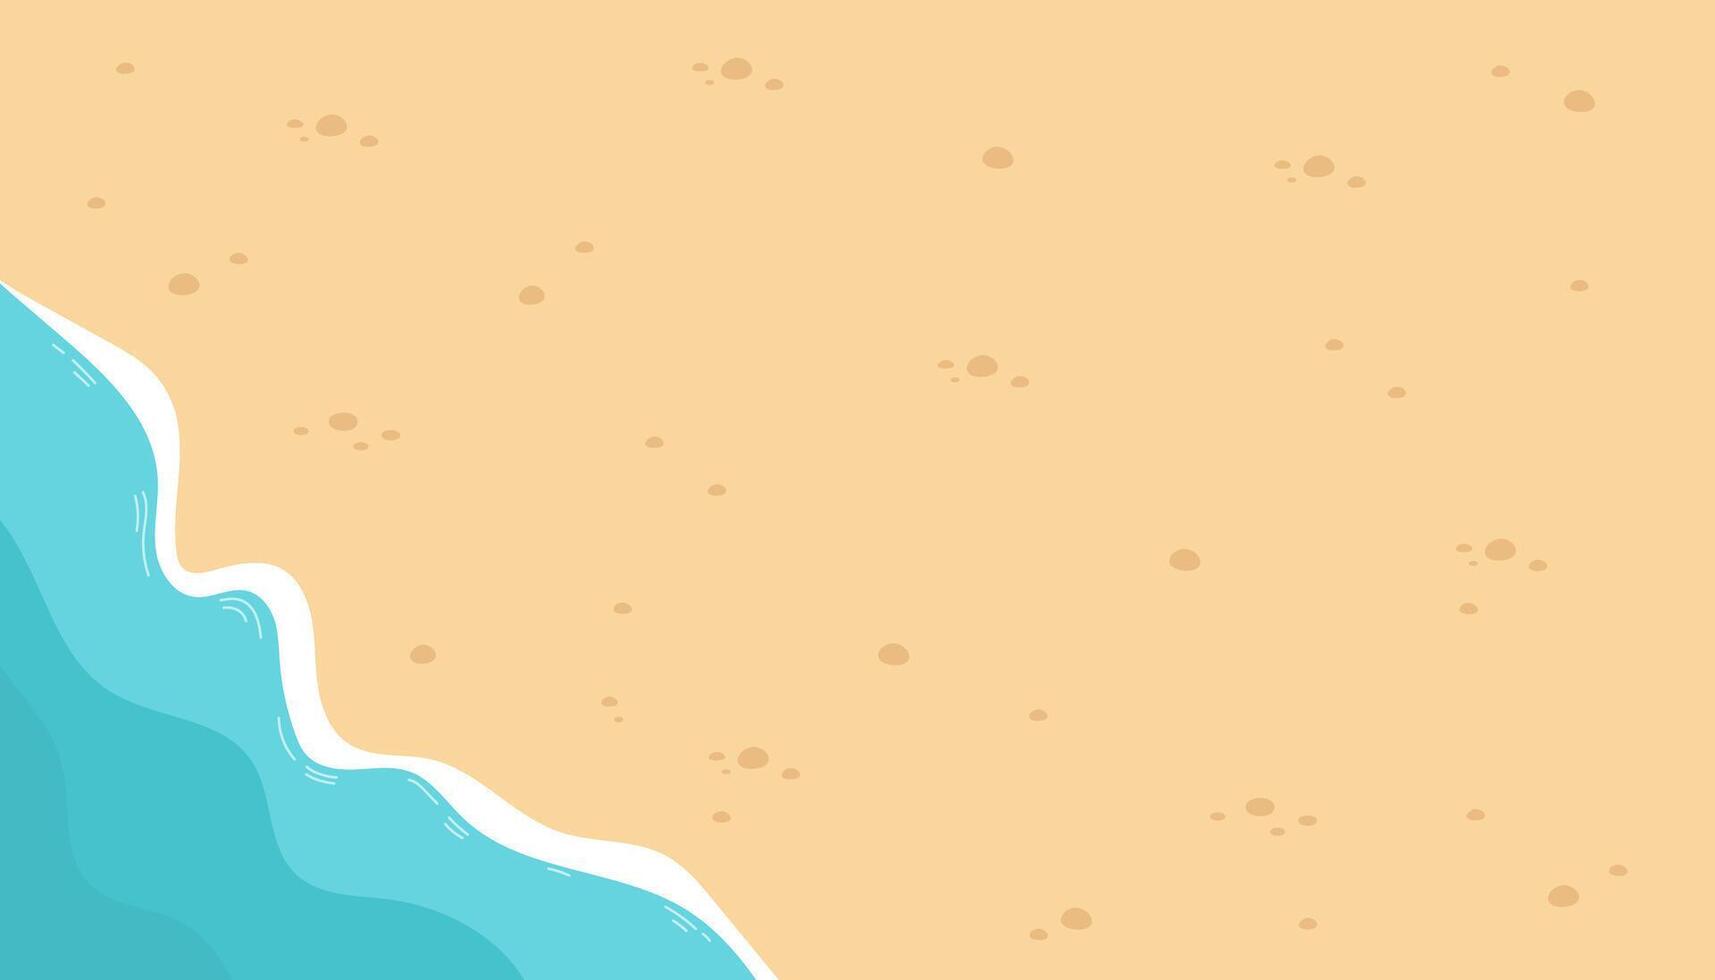 Beach sand, sea shore with blue waves background vector